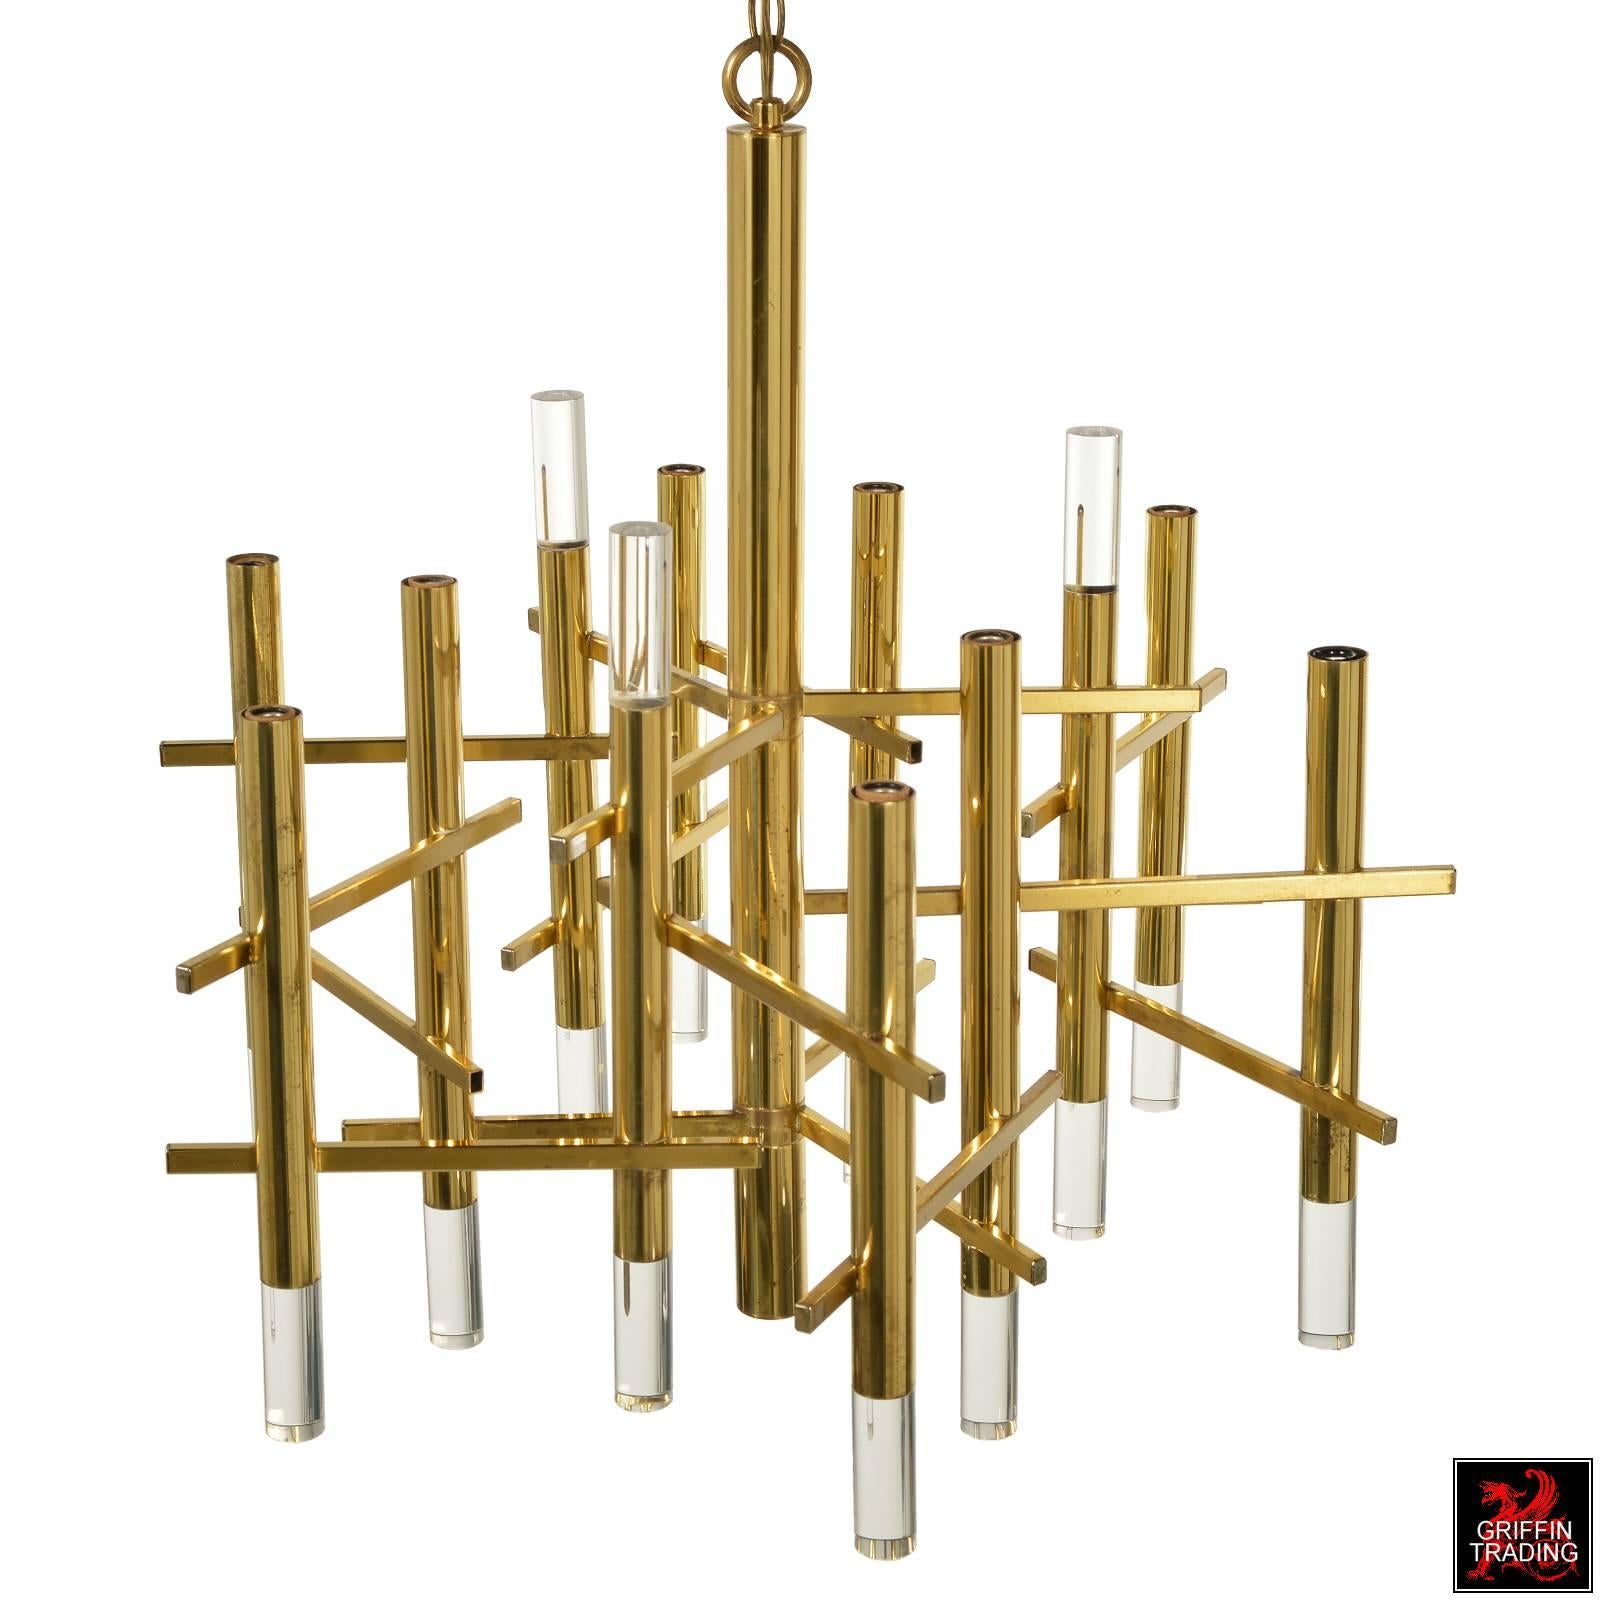 This striking brass and Lucite chandelier is by Italian designer Gaetano Sciolari. The chandelier has an elegant structural appearance, which is created by the horizontal brass rectangular tubes in a staggered configuration, connecting the 12 large